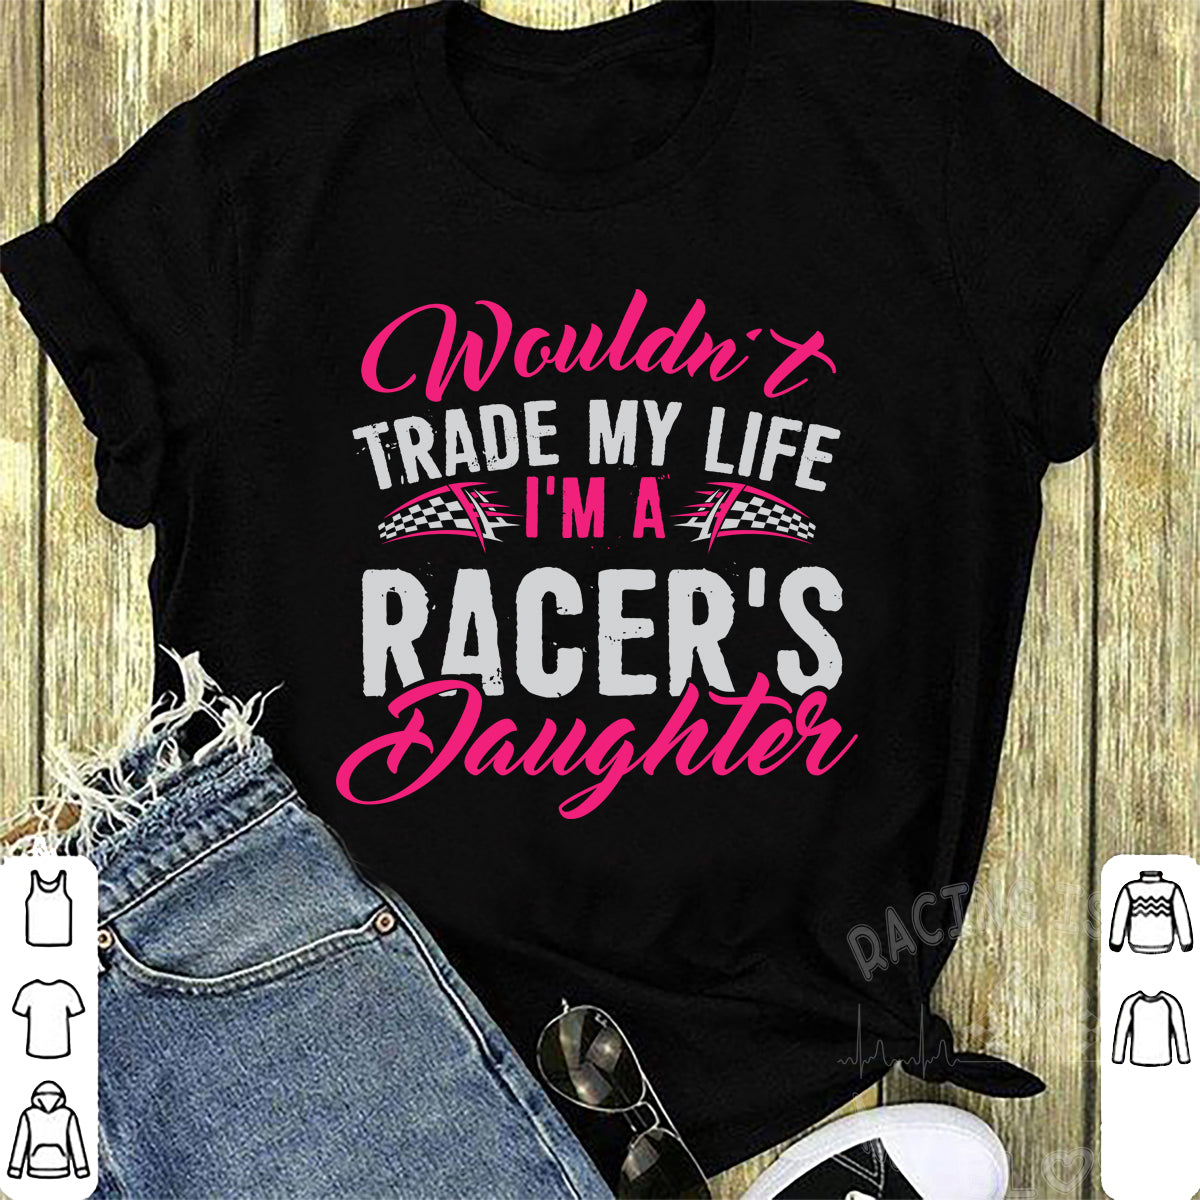 Wouldn't Trade My Life I'm A Racer's Daughter T-Shirts!